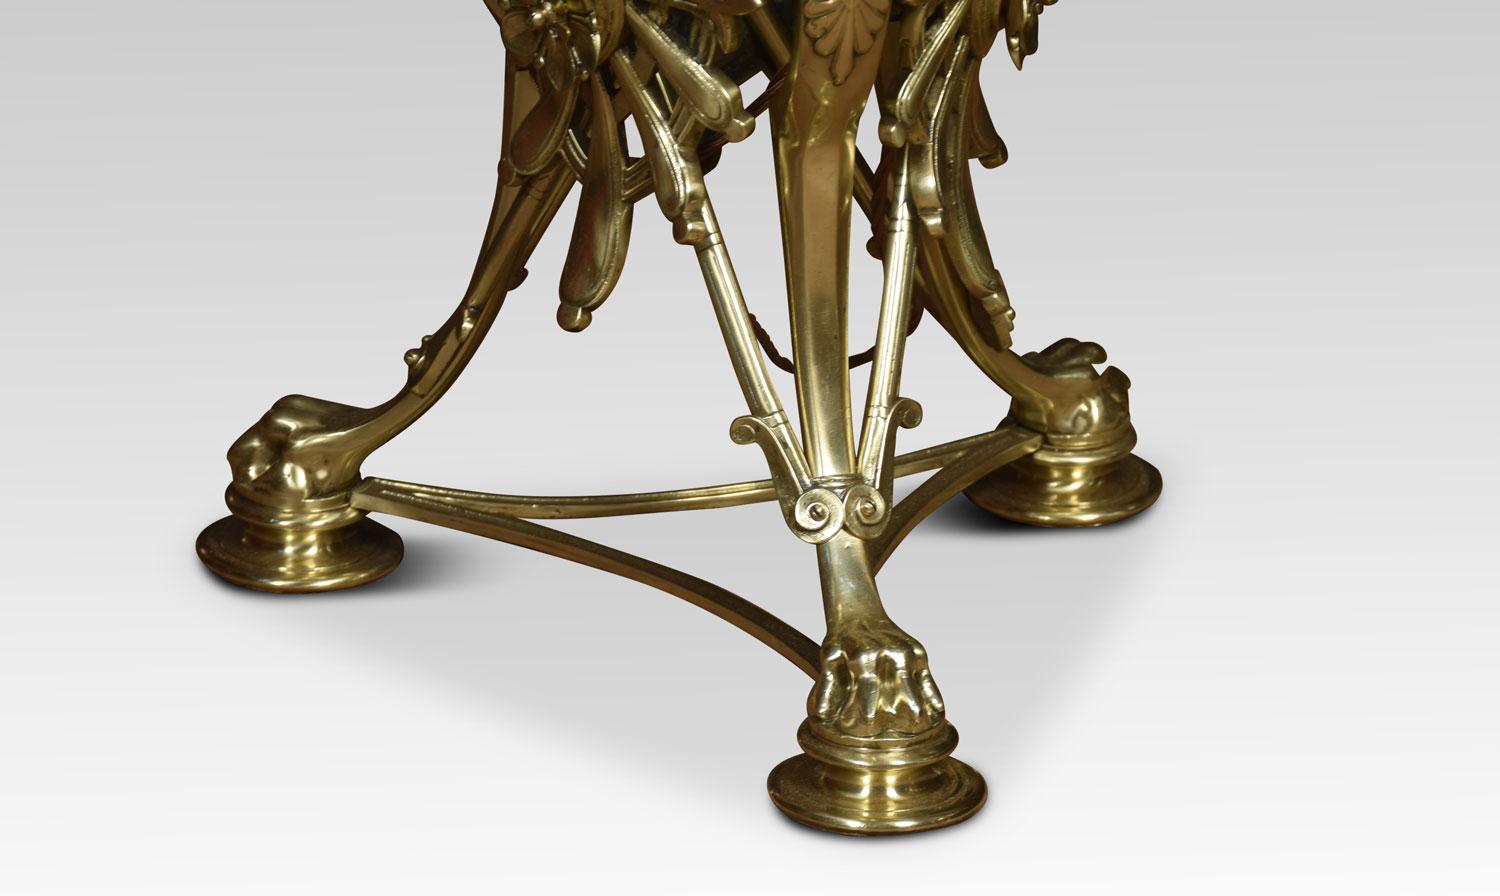 Exhibition quality standard lamp, the central adjustable brass column above the base having three maiden headed stems above tapering legs terminating in paw feet.
Dimensions:
Height 58 inches when fully extended 72.5 Inches
Width 16 inches
Depth